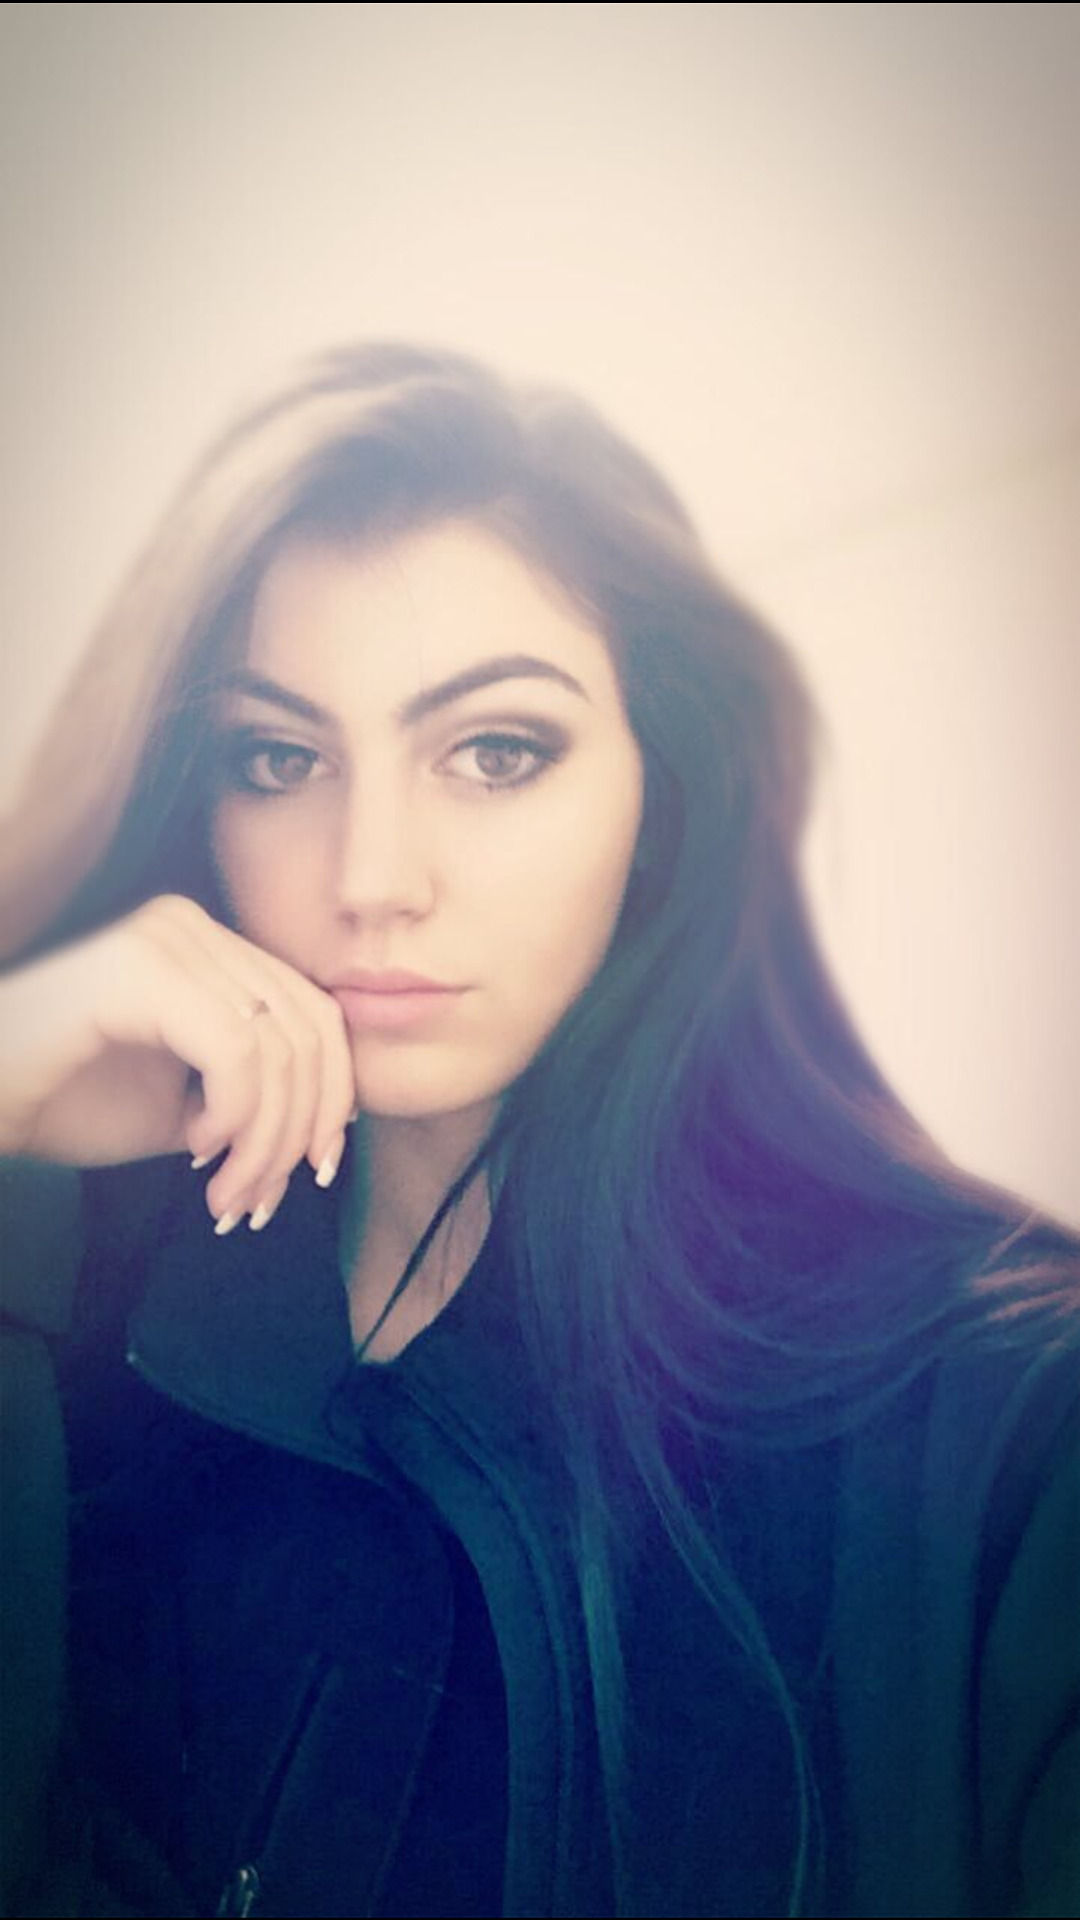 Mikaela from react